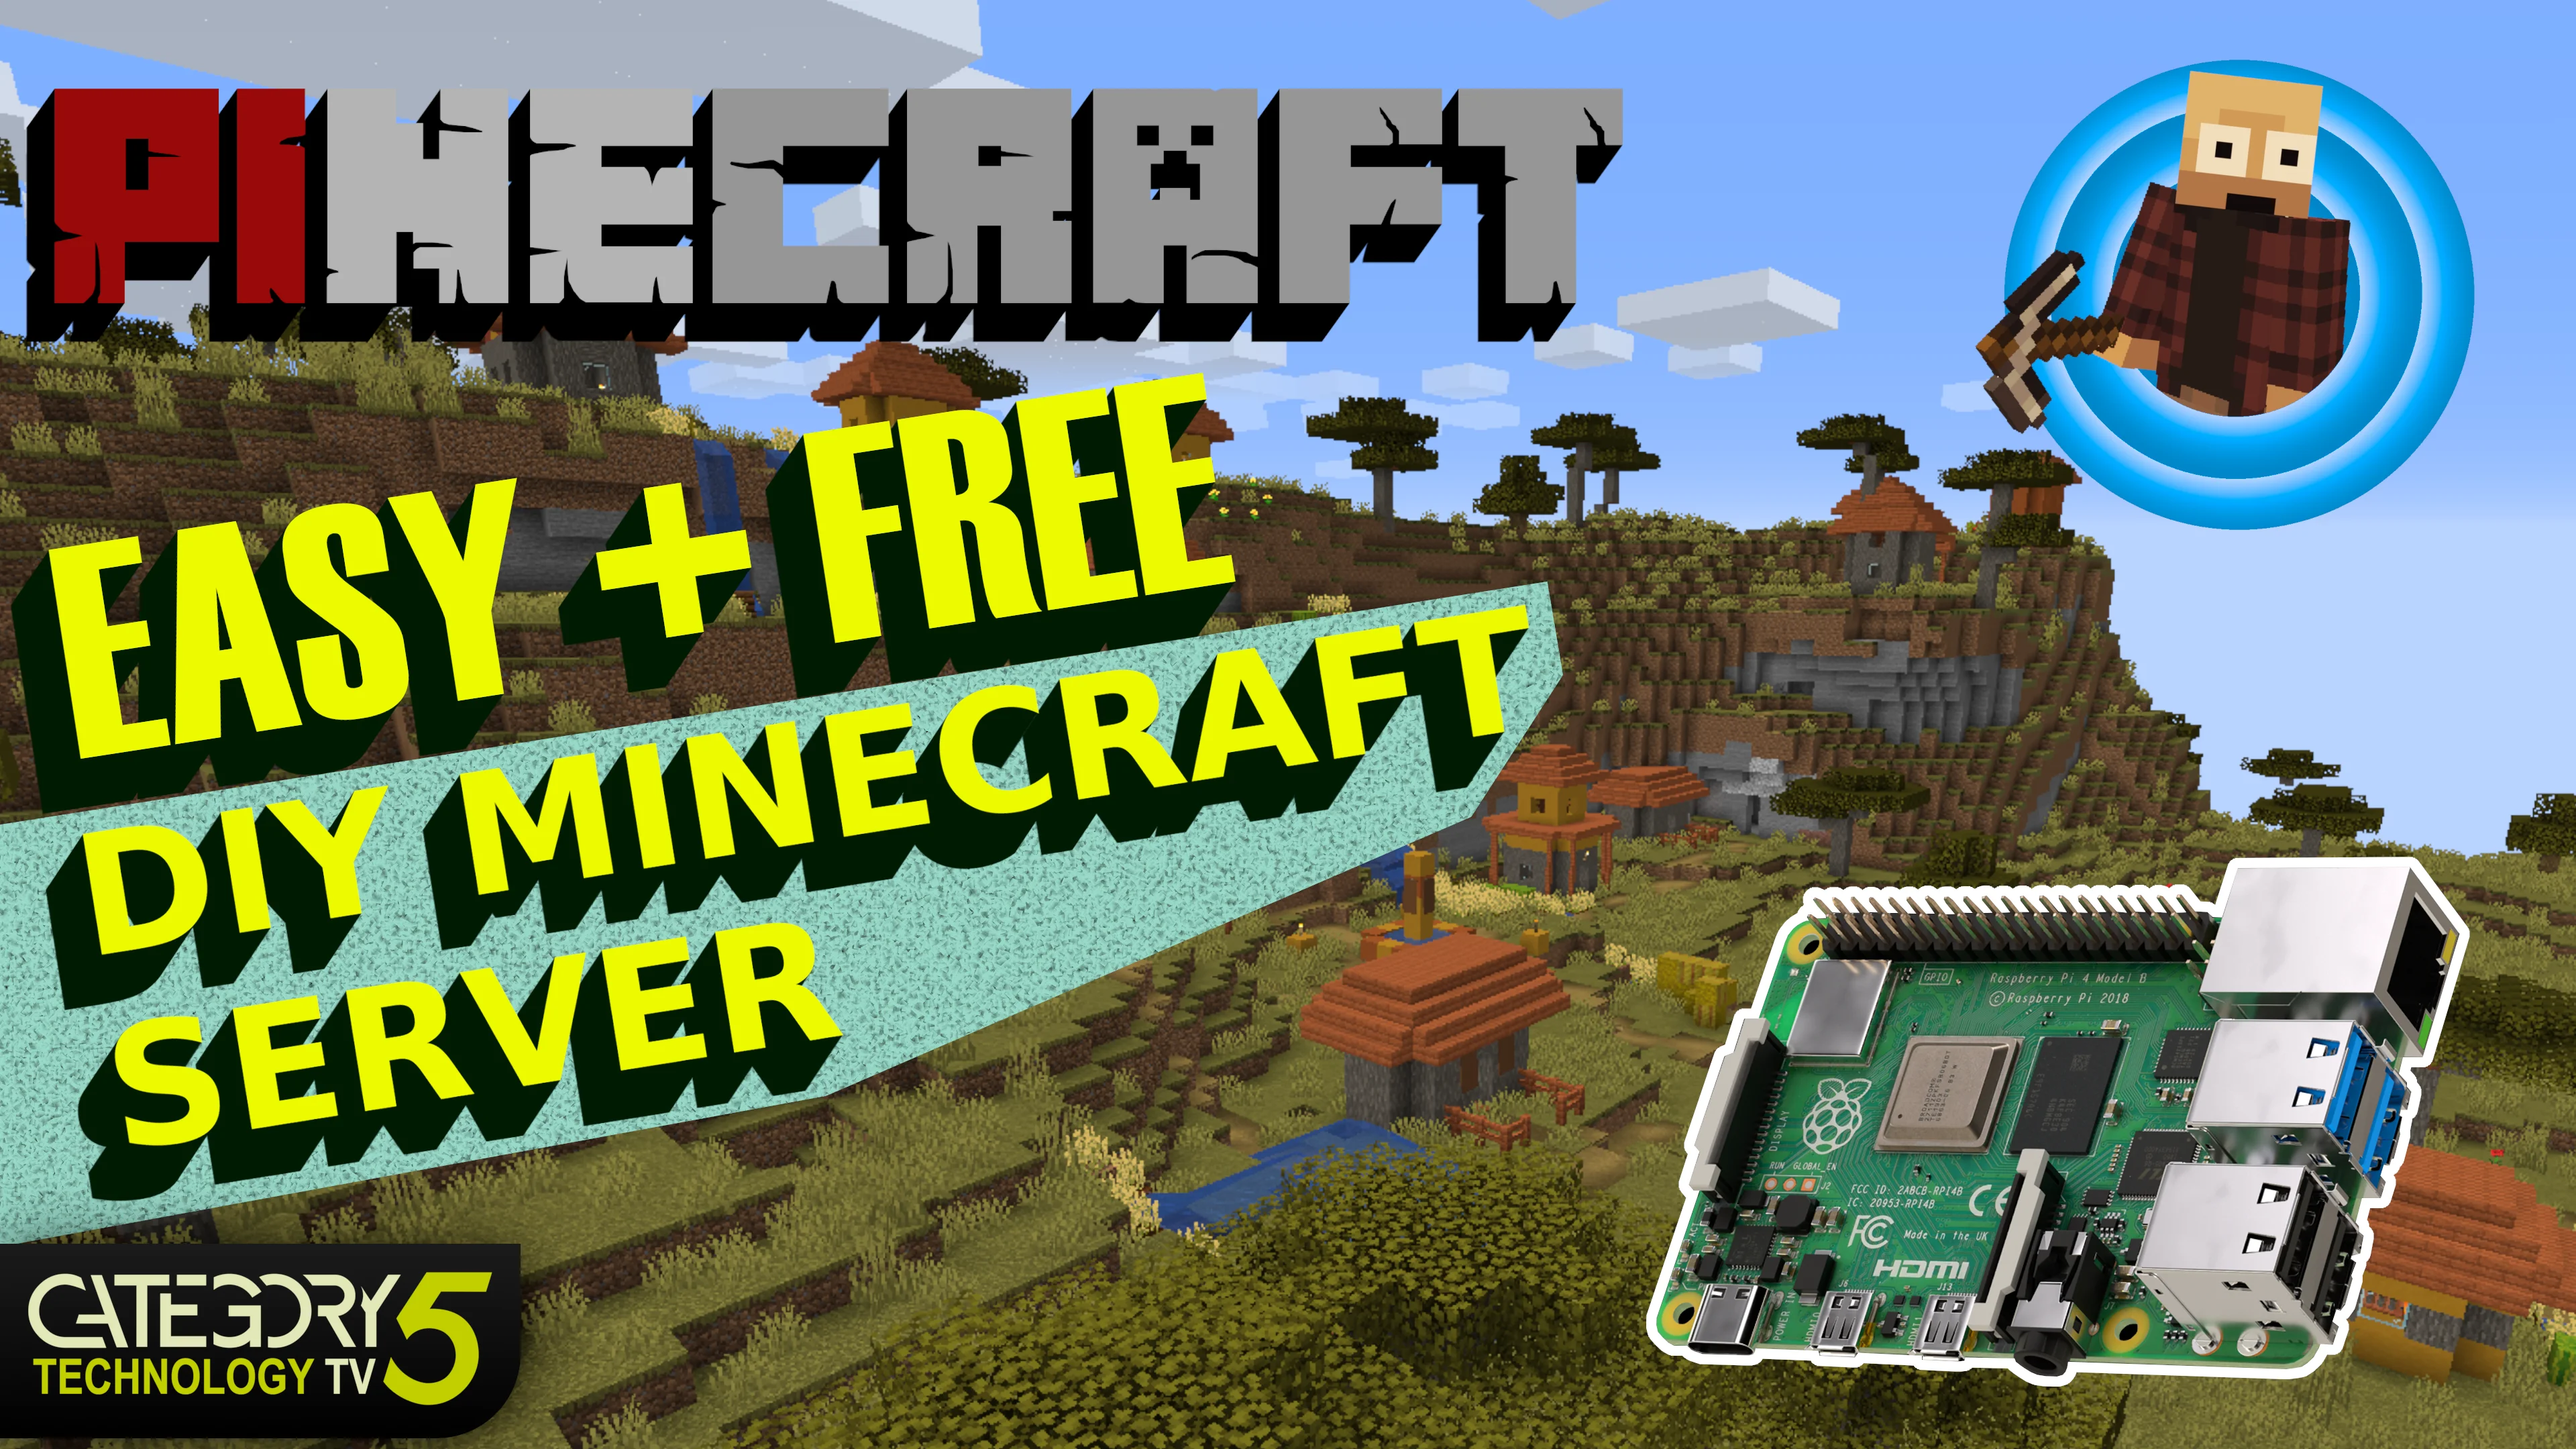 How to play Minecraft for Free Online At SeekaHost on Vimeo